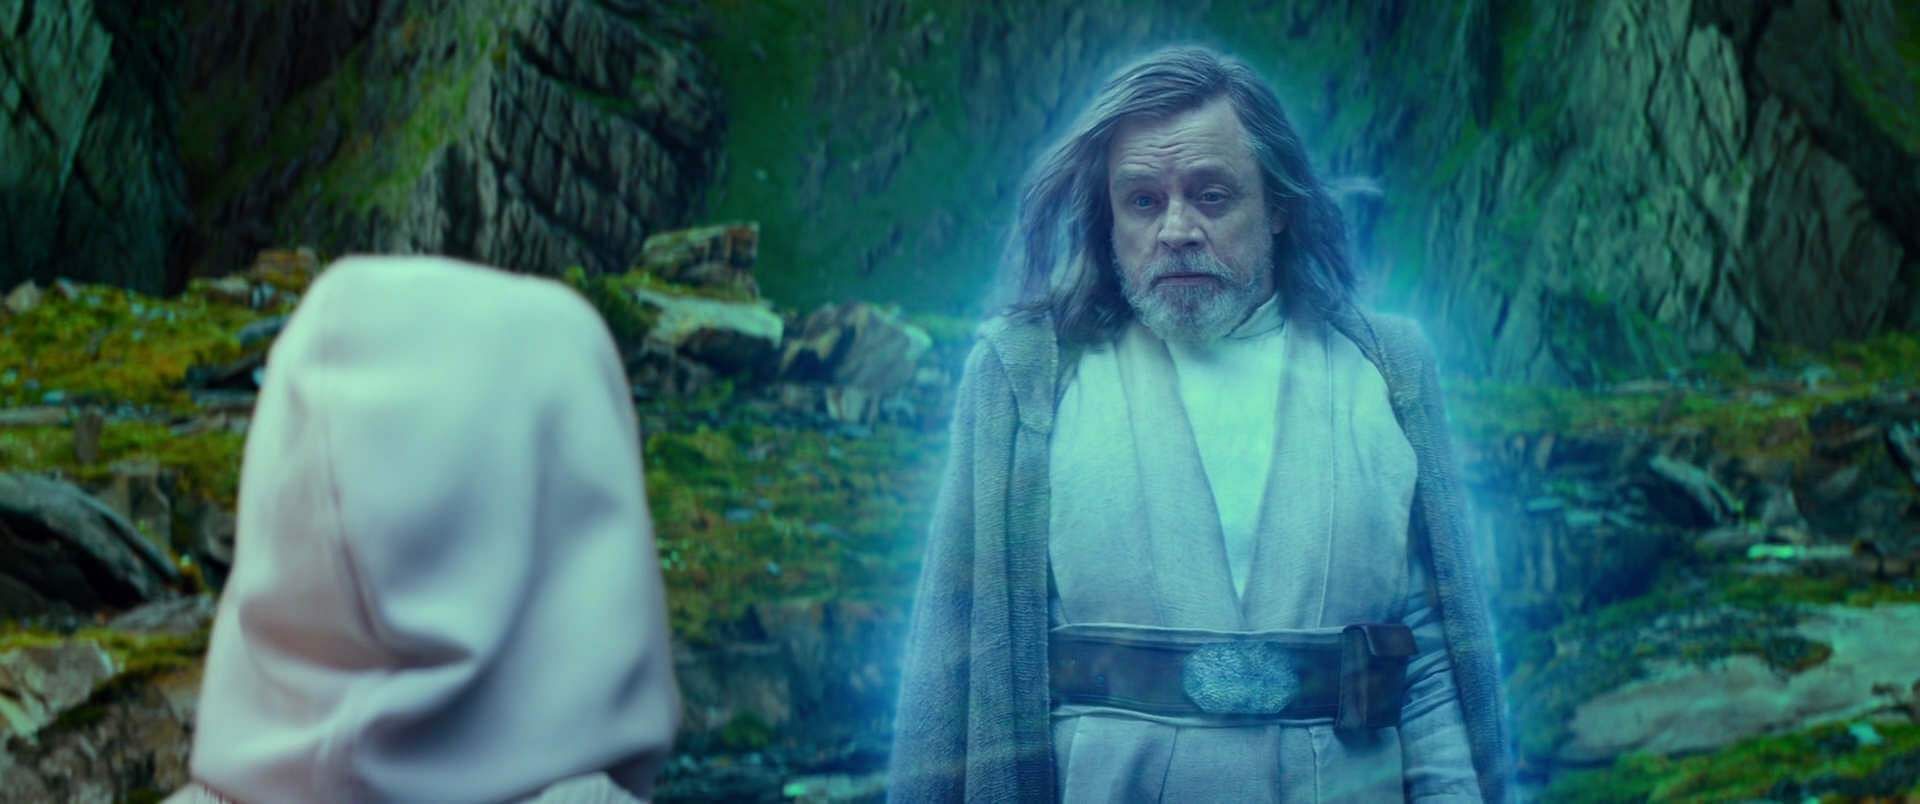 Luke Skywalker's enduring legacy bridges the past and future in the highly anticipated upcoming Star Wars film (Image via Lucasfilm)